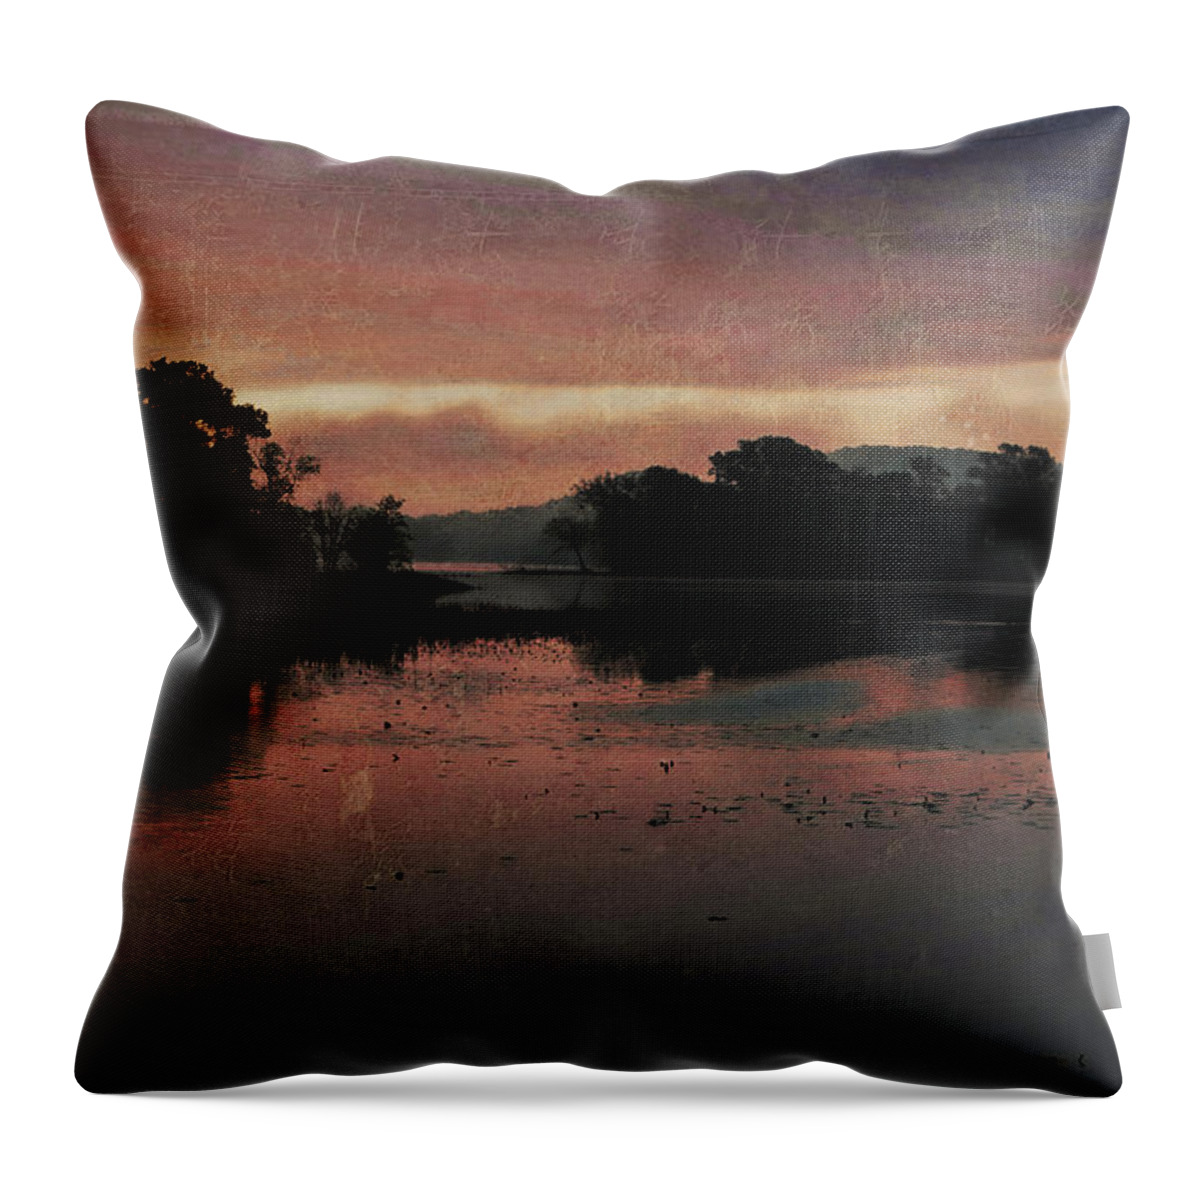 Dawn Throw Pillow featuring the photograph New Day Approaching by Theo O'Connor